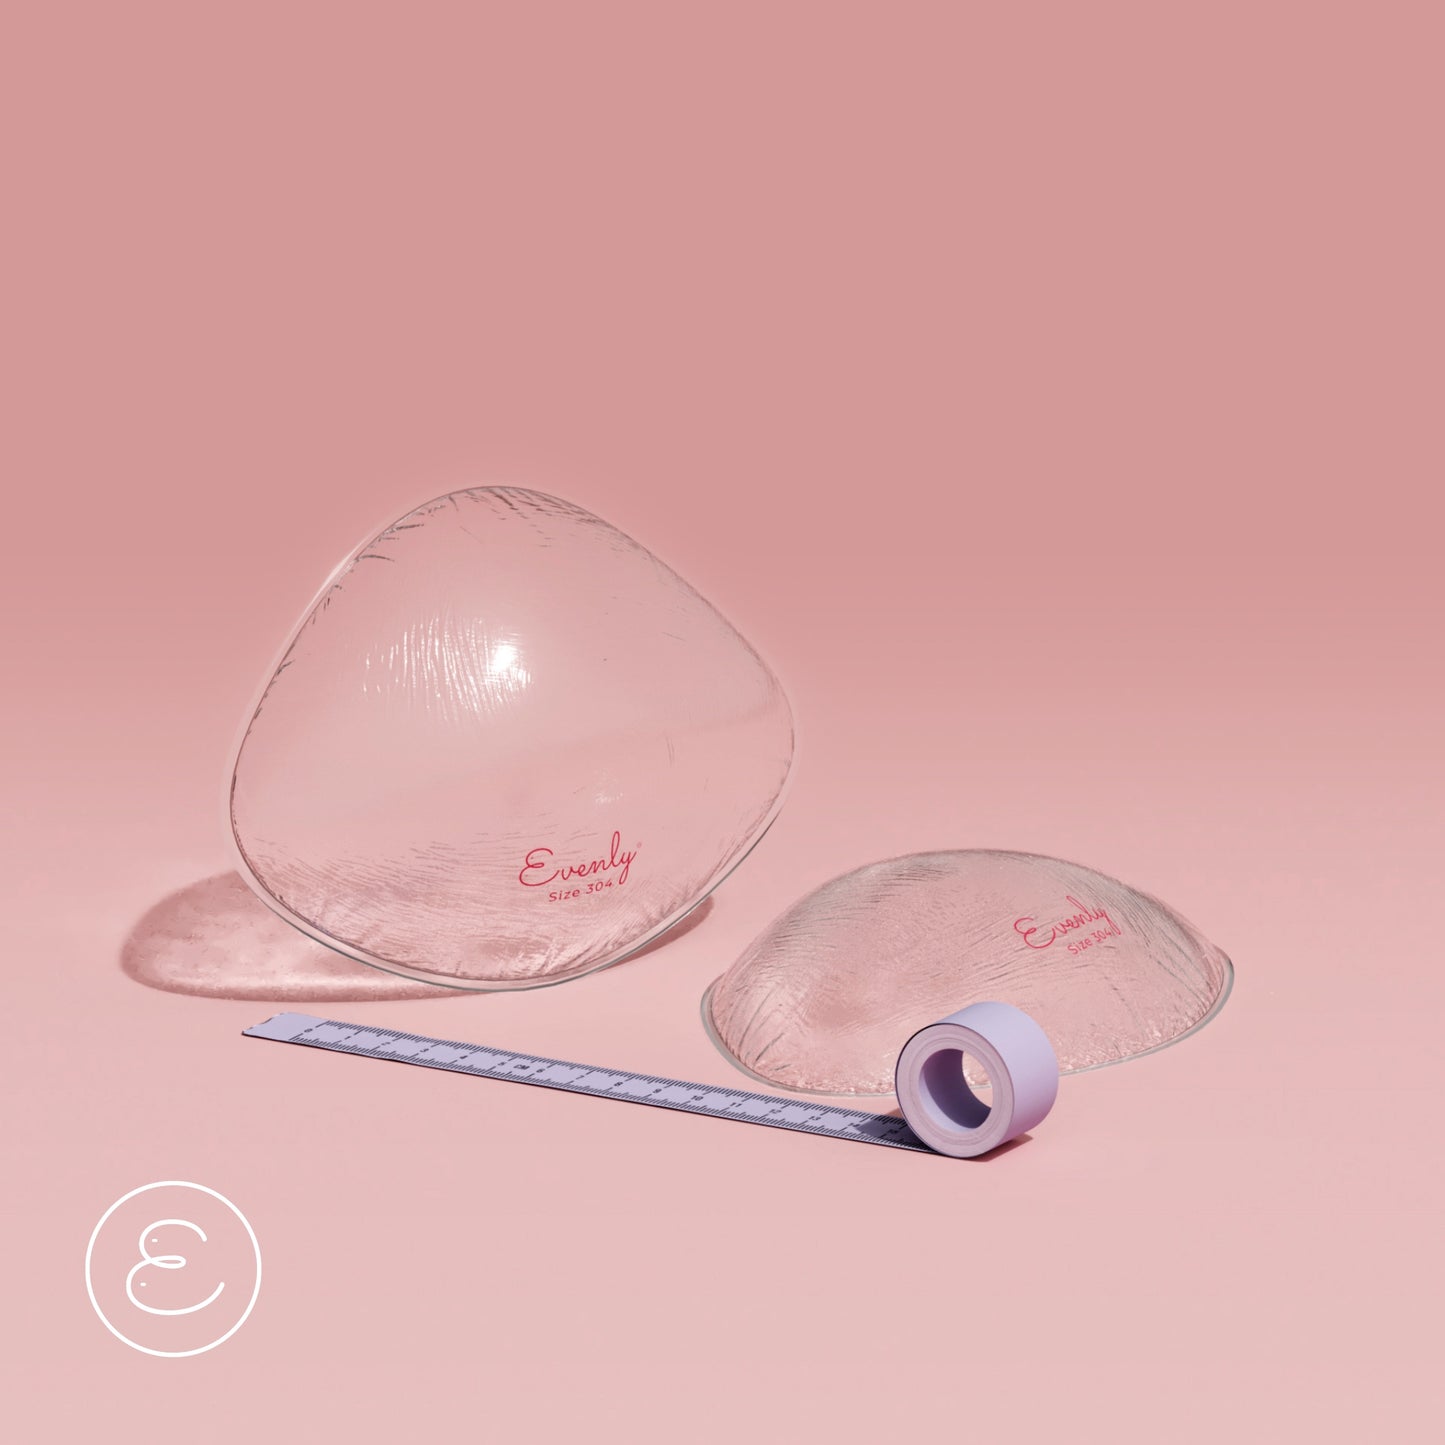 Evenly Bra Balancers for breast asymmetry - lightweight silicone balancers for a symmetrical appearance. Restore confidence, alleviate discomfort, and achieve even weight distribution. Ideal for everyday wear, swimming, and exercising. Available at The Fitting Service